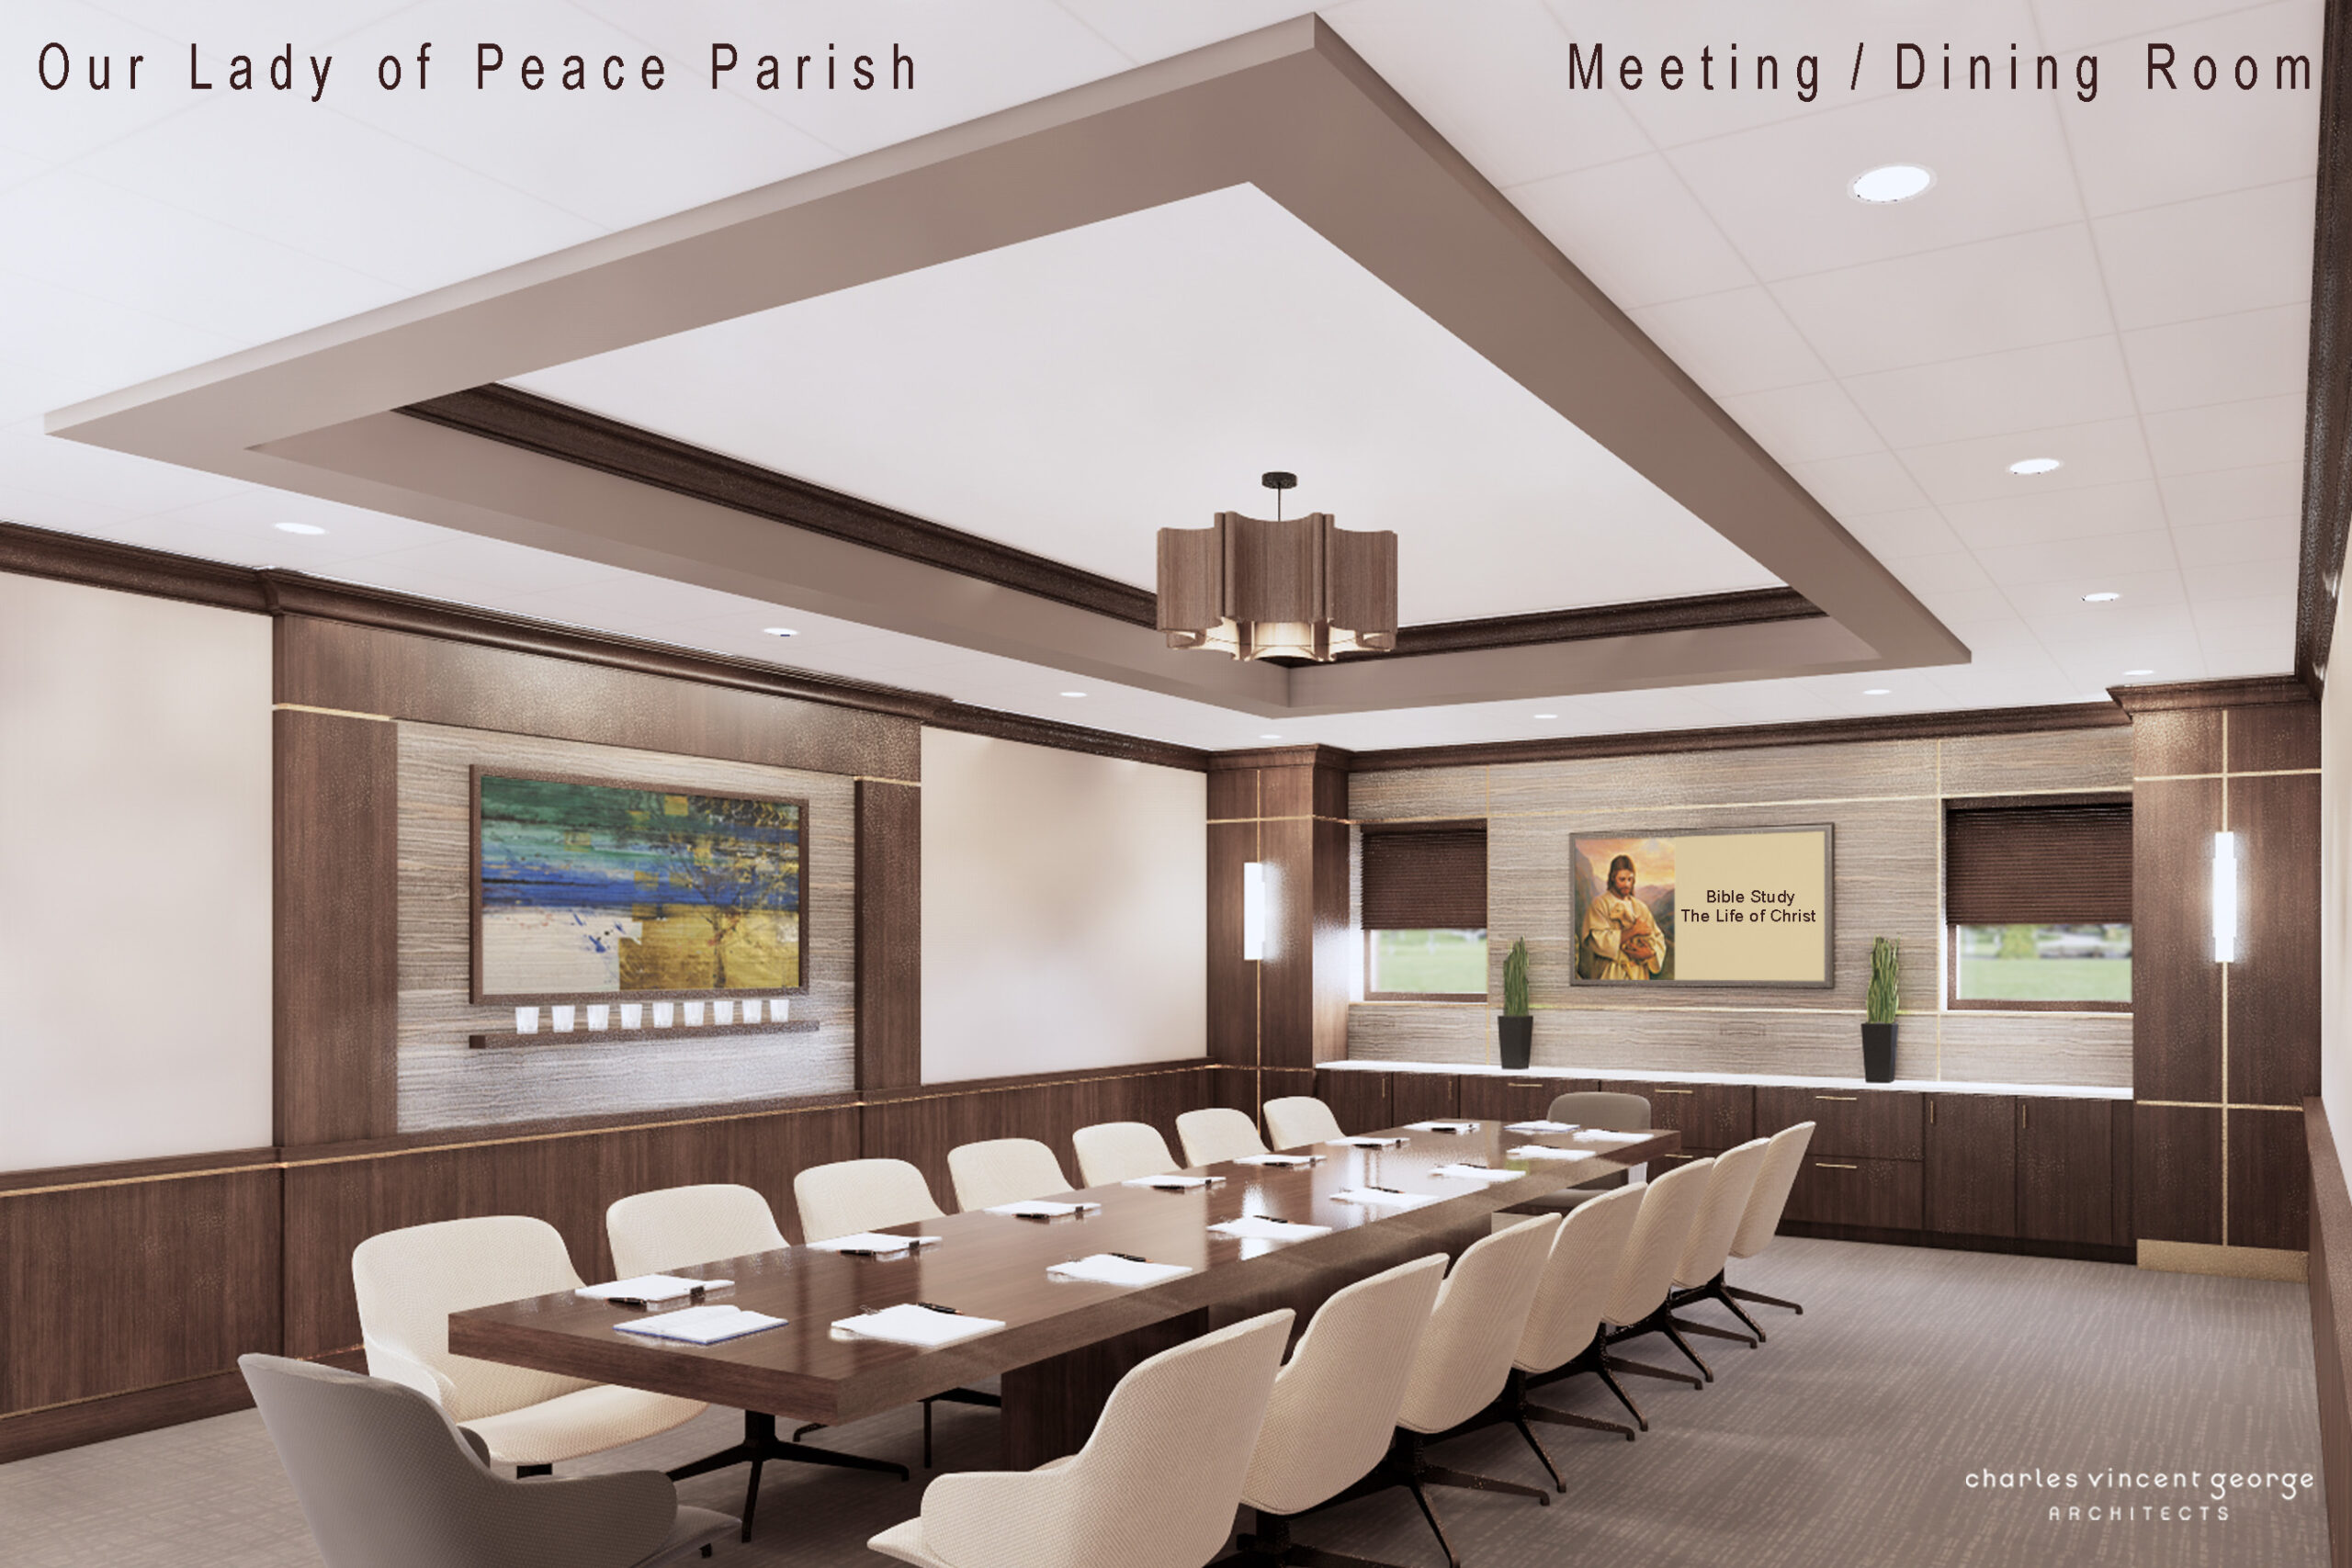 64640489e0a6a4f14f646ea5_Dining-Meeting-20Room-20Rendering